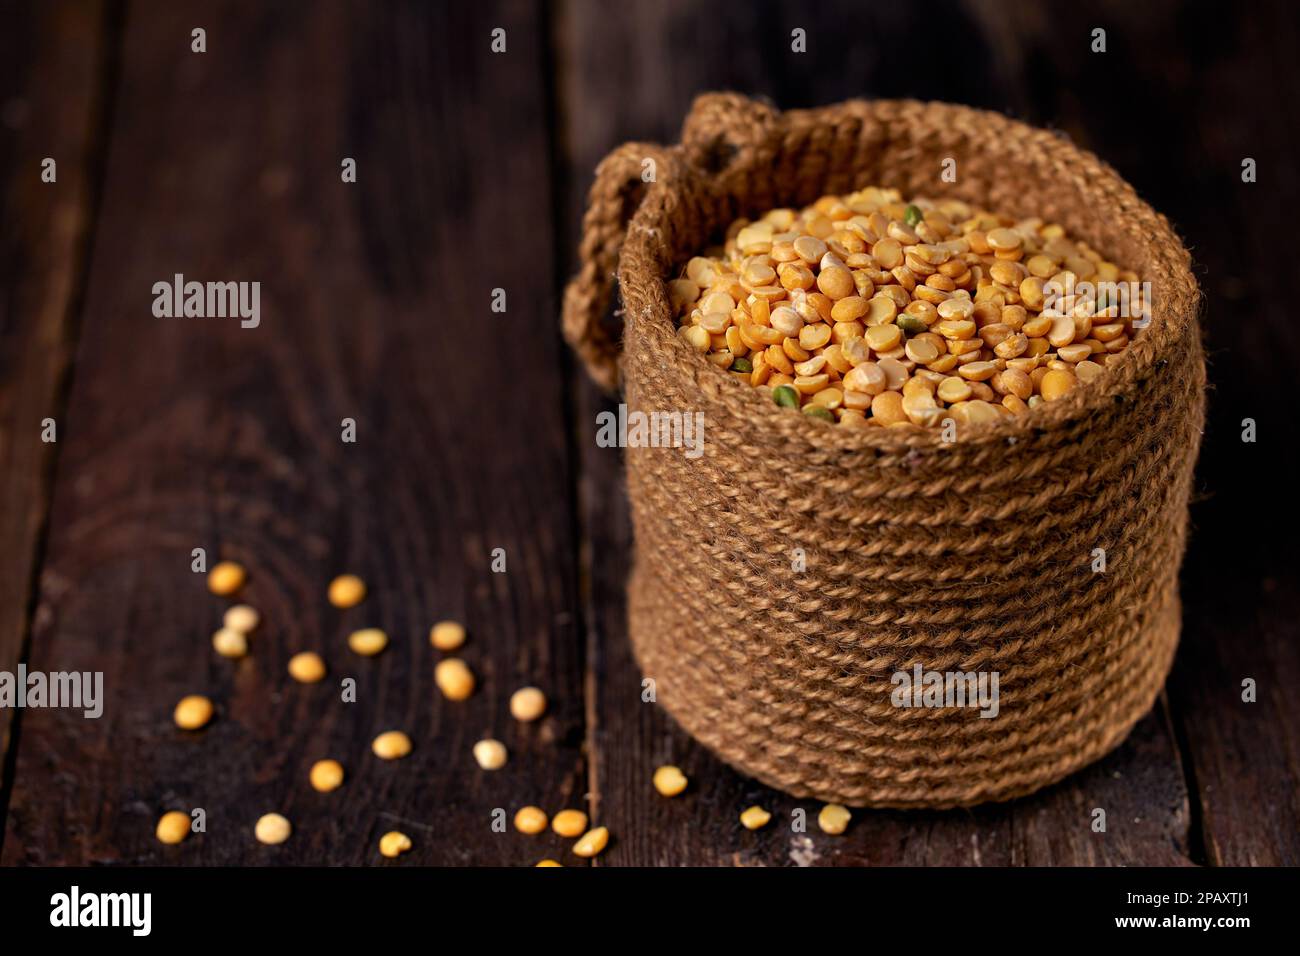 Dry yellow pea grains in a jute bag on a dark wooden table Stock Photo